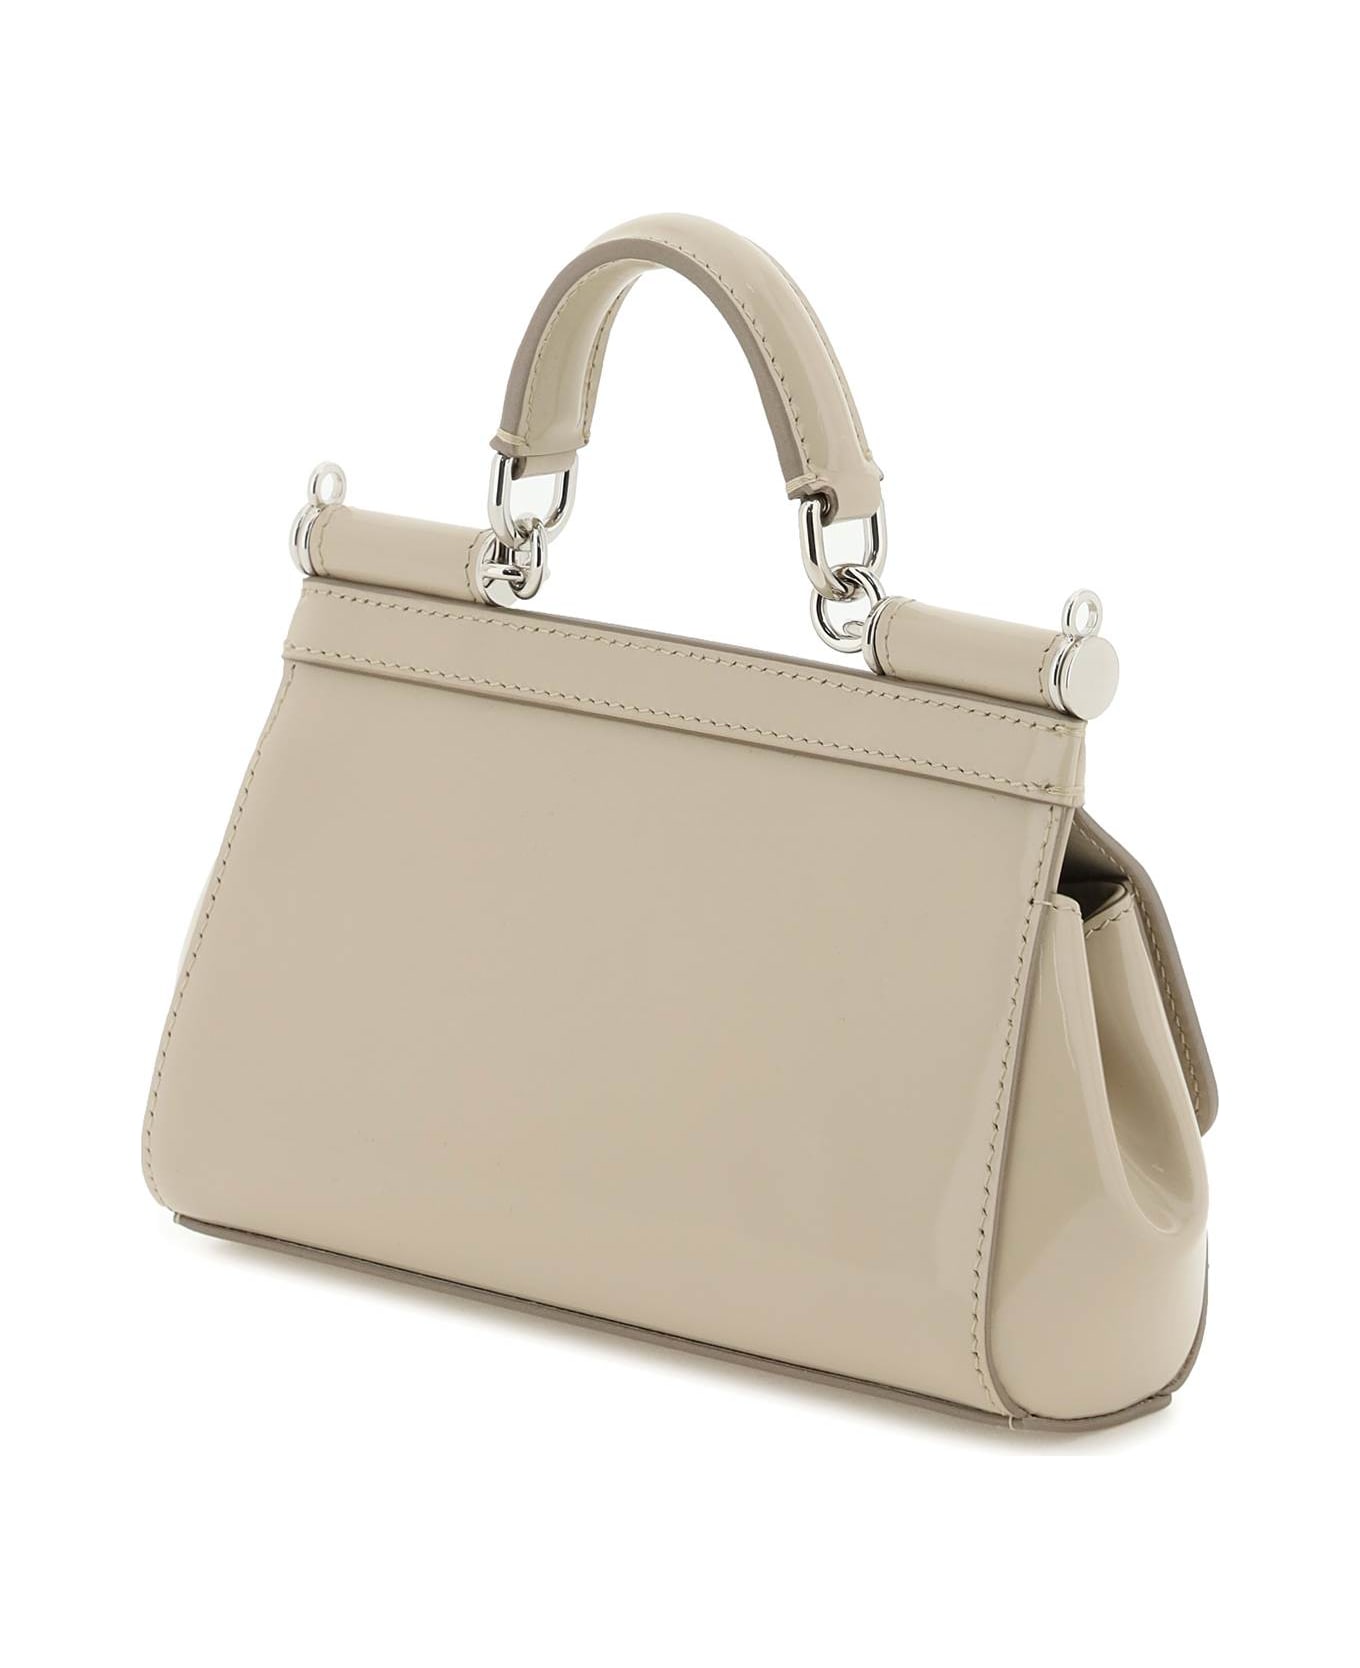 Dolce & Gabbana Patent Leather Small 'sicily' Bag - Beige